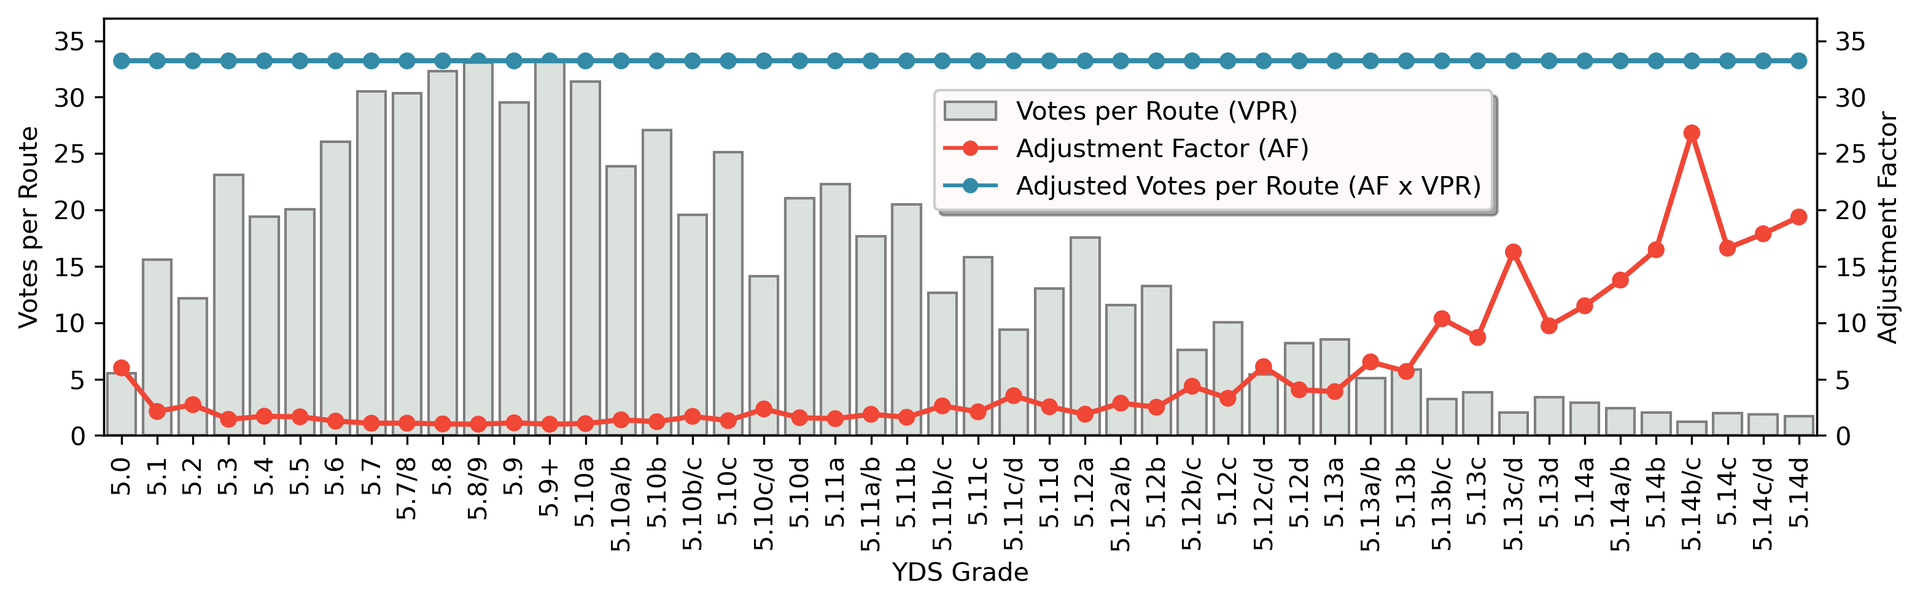 Distribution of user vote counts by grade